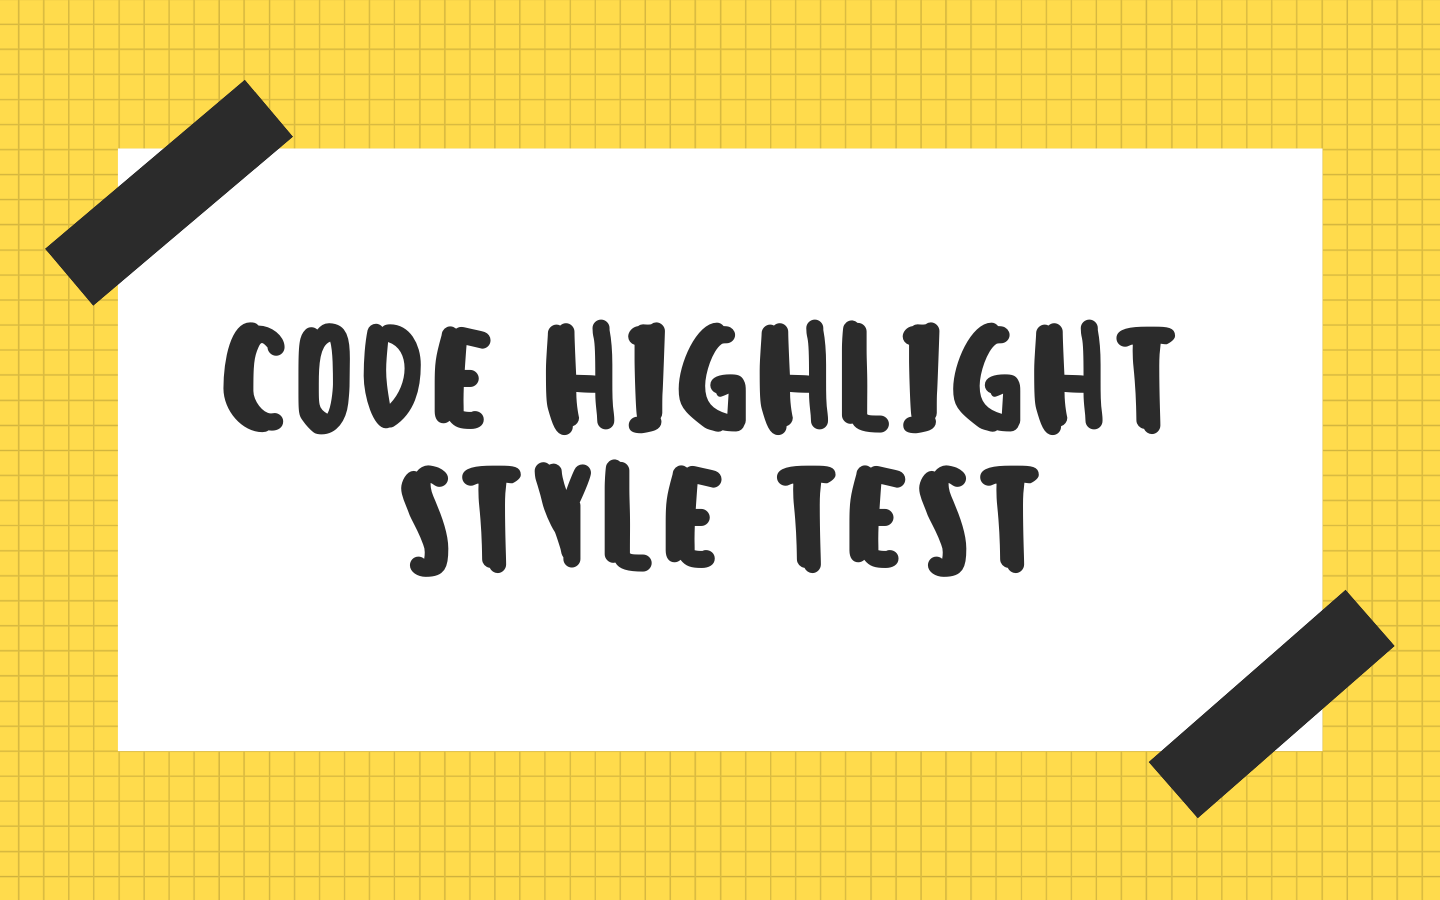 Code Highlight Style test